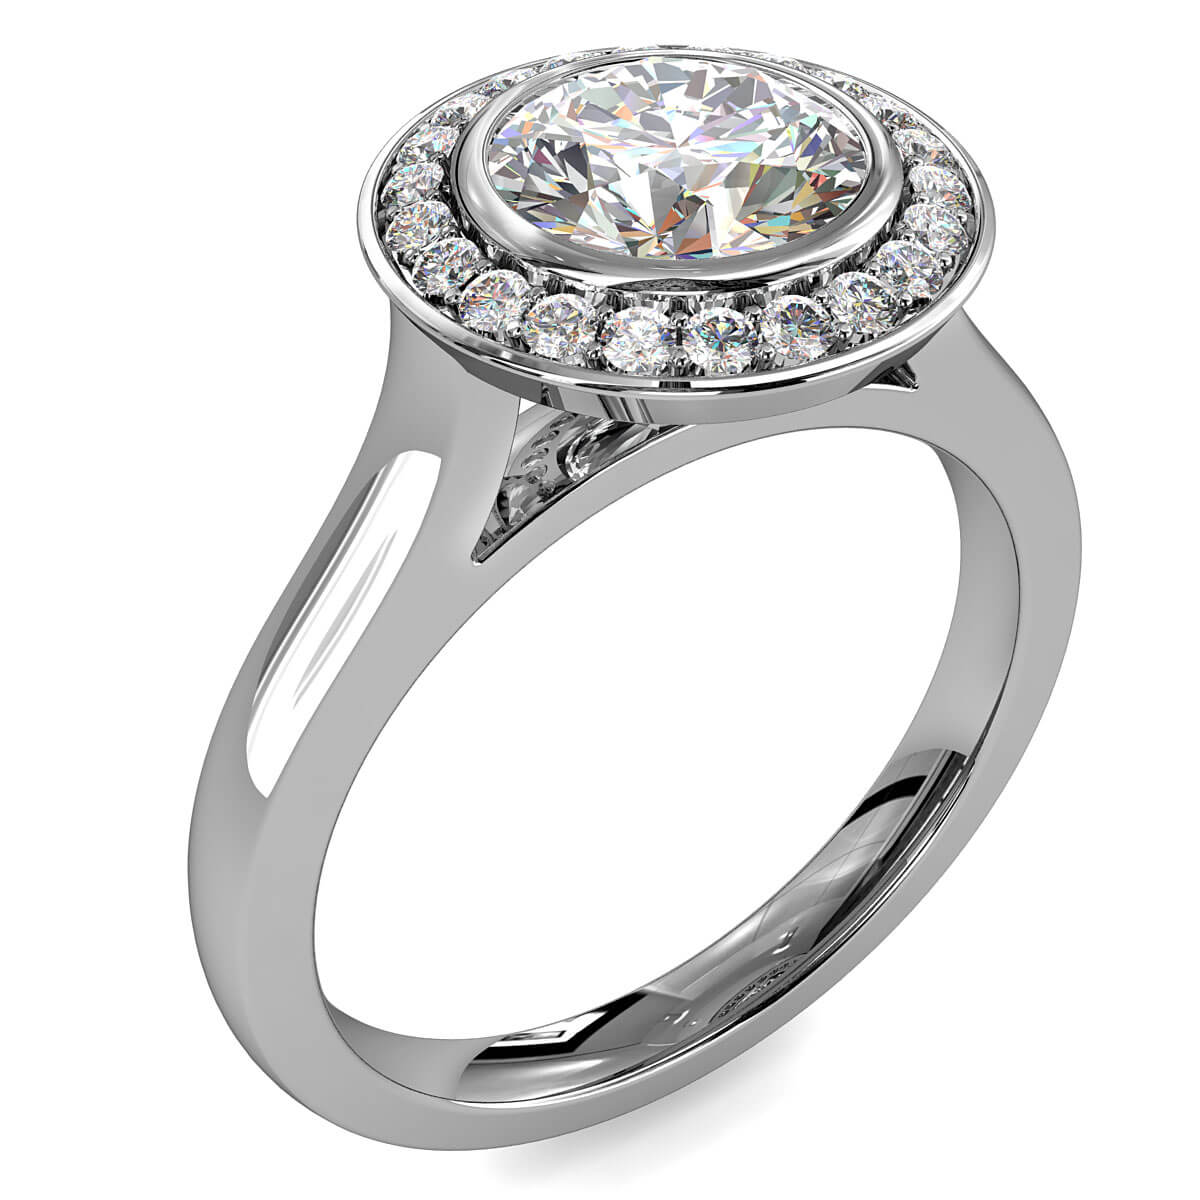 Round Brilliant Cut Halo Diamond Engagement Ring, Bezel Set Centre Stone in a Fine Bead Set Halo on Flat Band with an Open Undersetting.